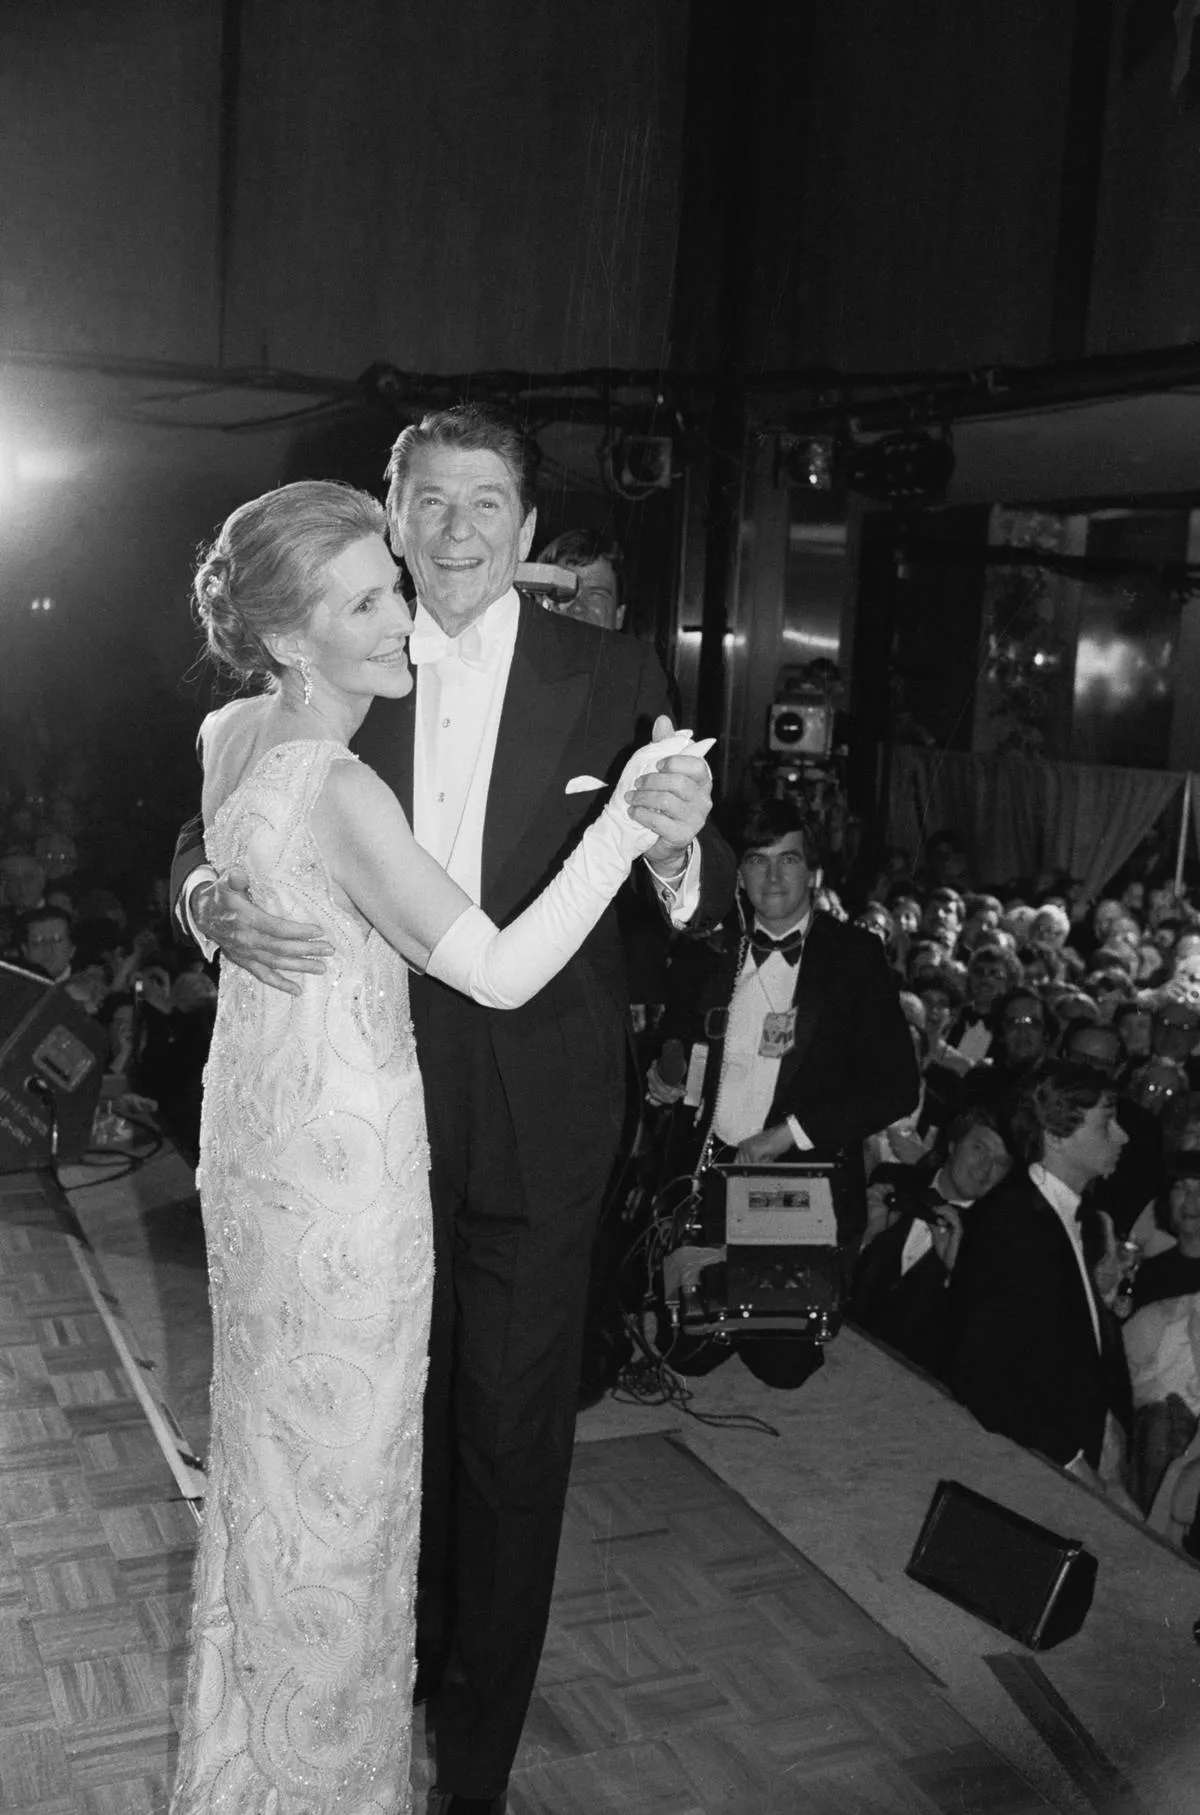 Ronald and Nancy Reagan dance during the 1981 inauguration.